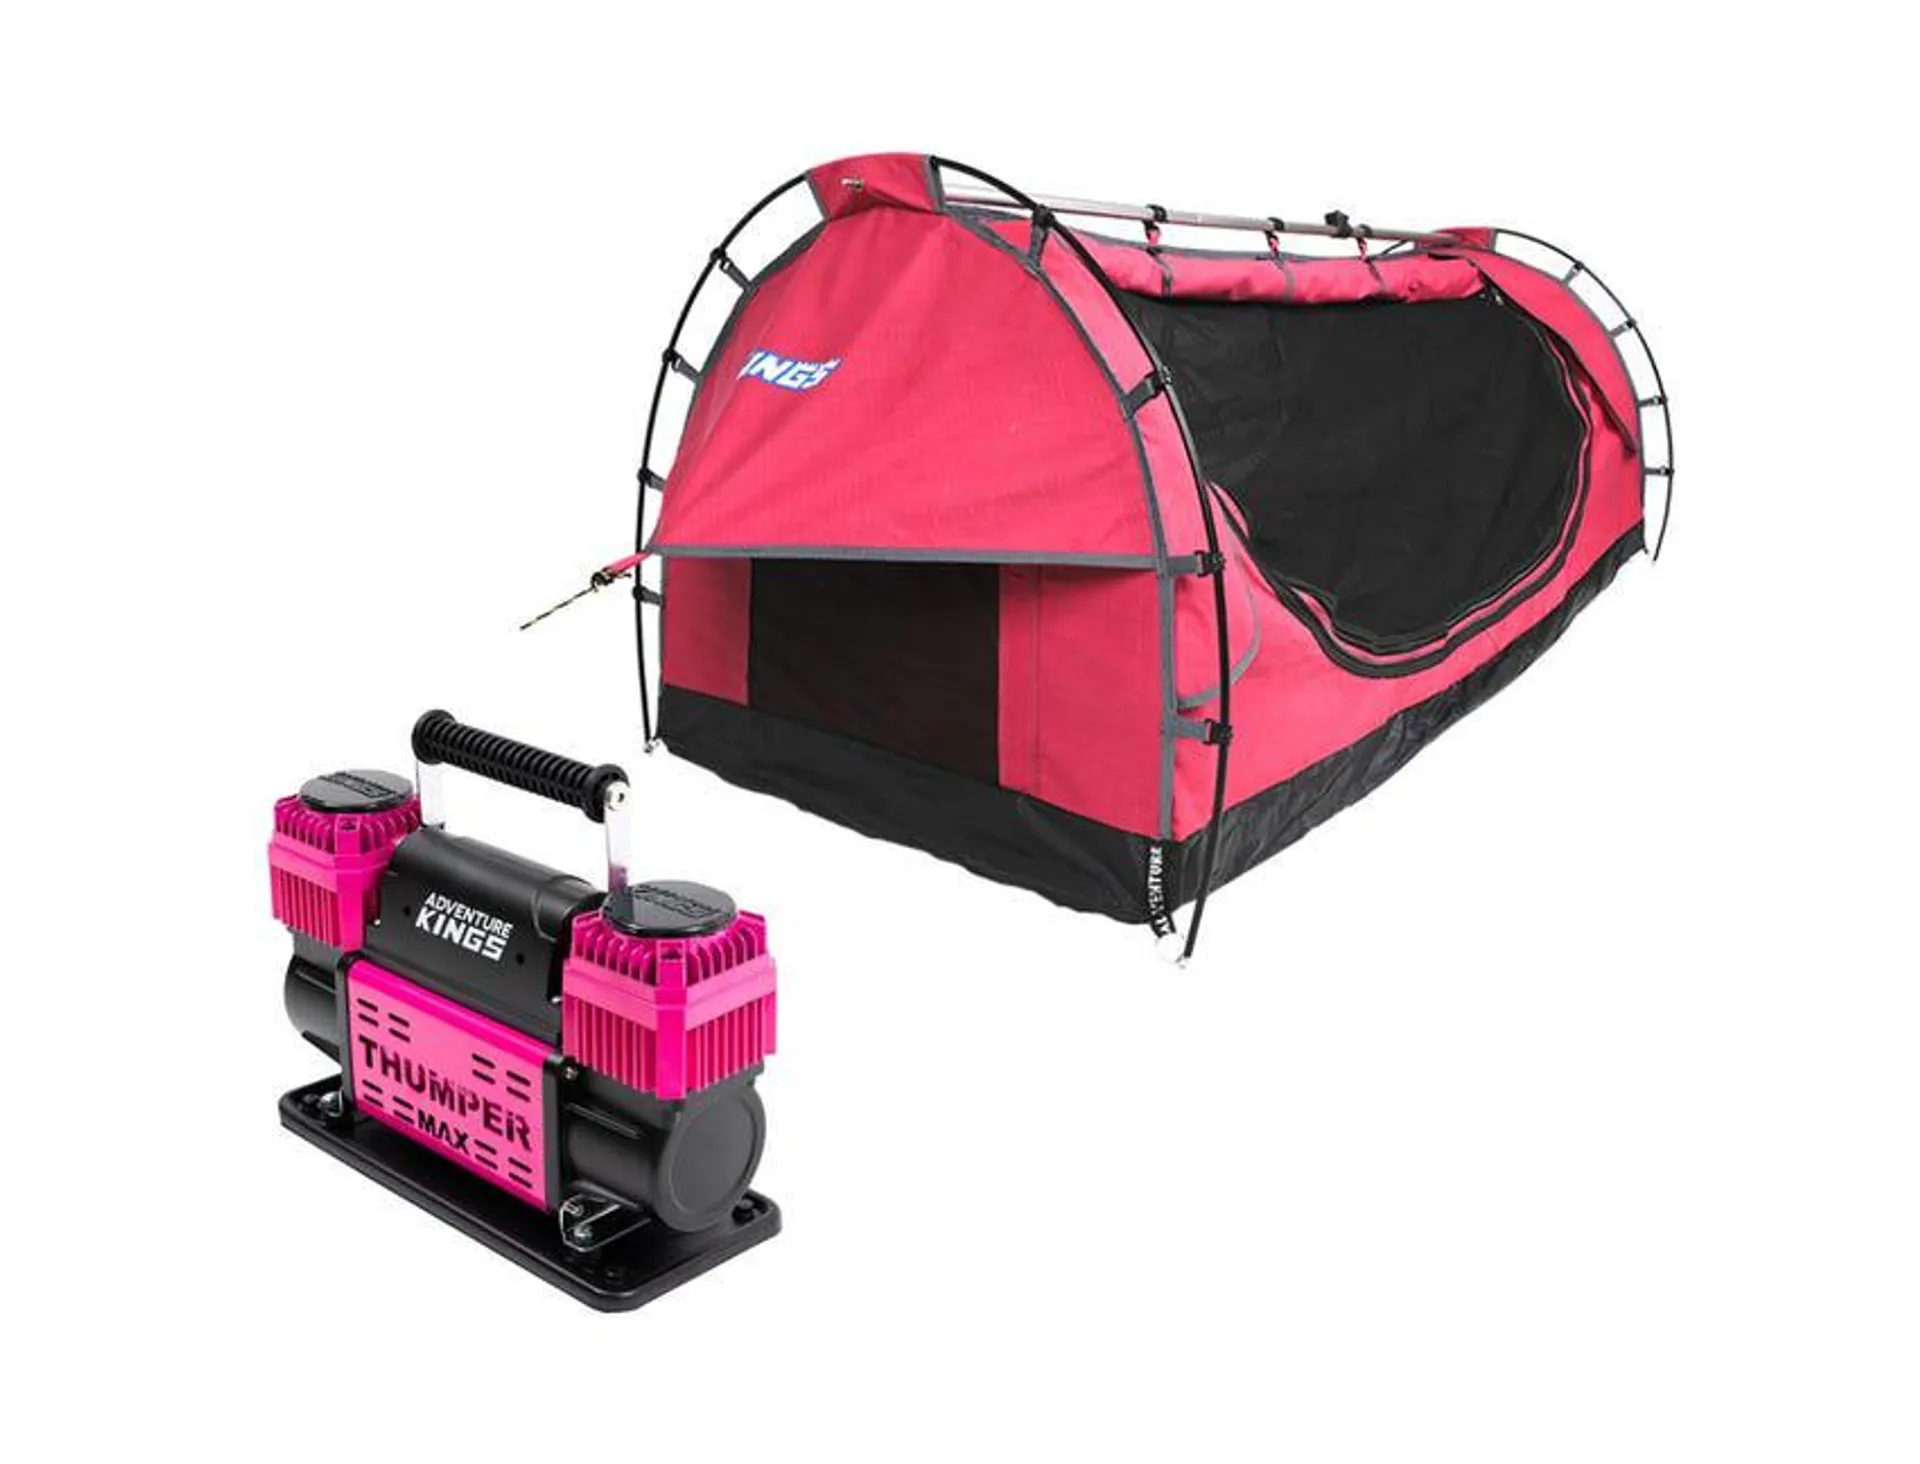 Kings Pink Deluxe Single Swag + Pink Thumper Max Dual Air Compressor MKII